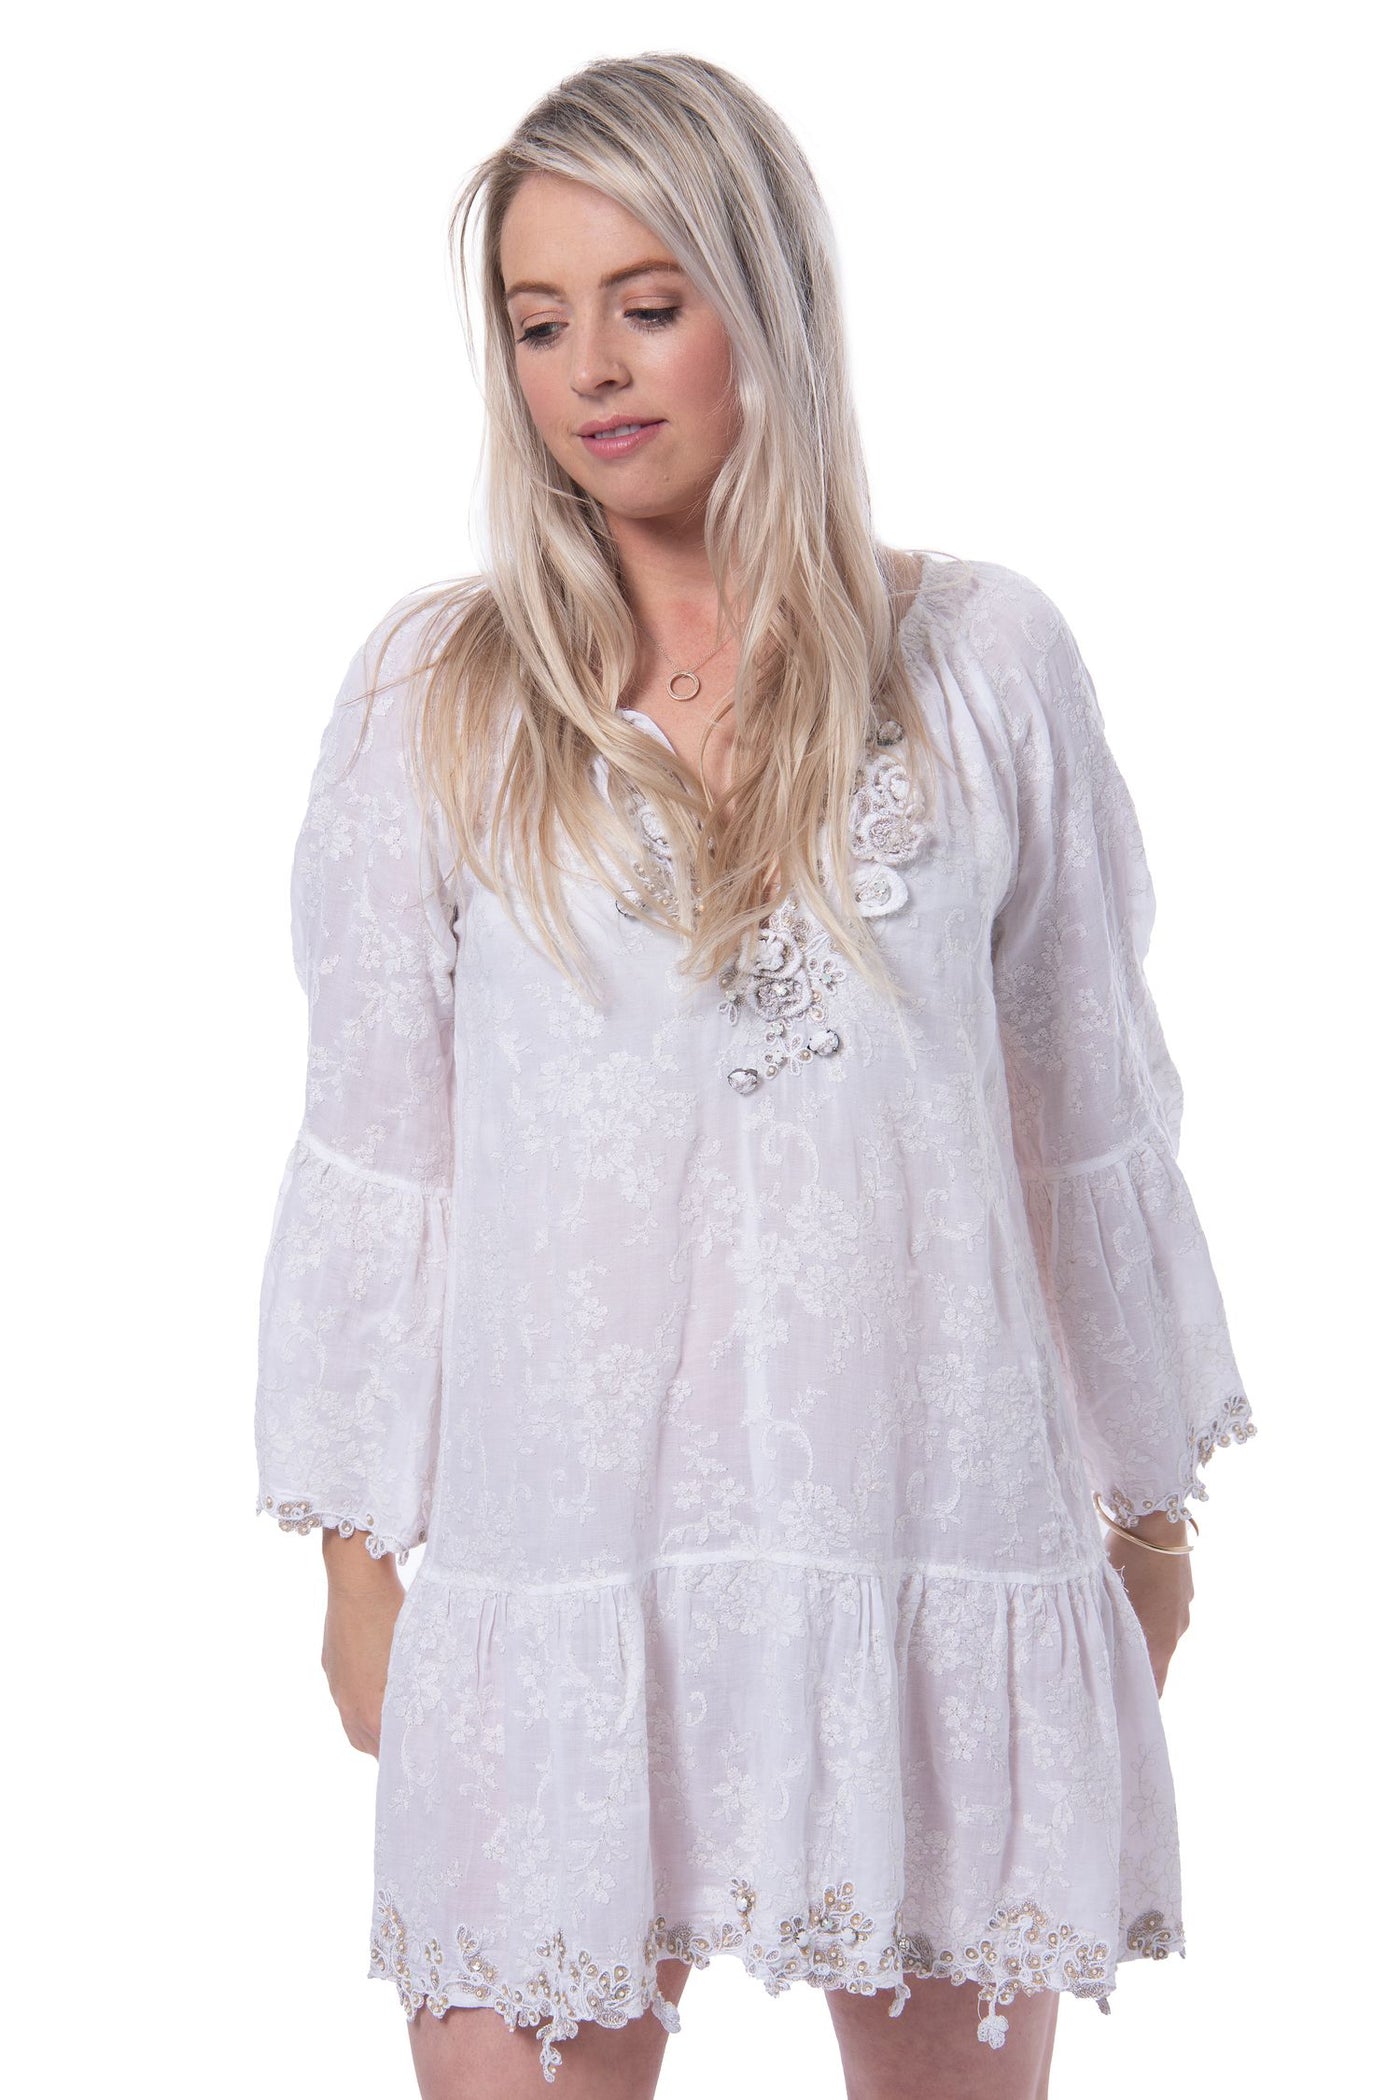 Emamo white sun cover up with embellishments